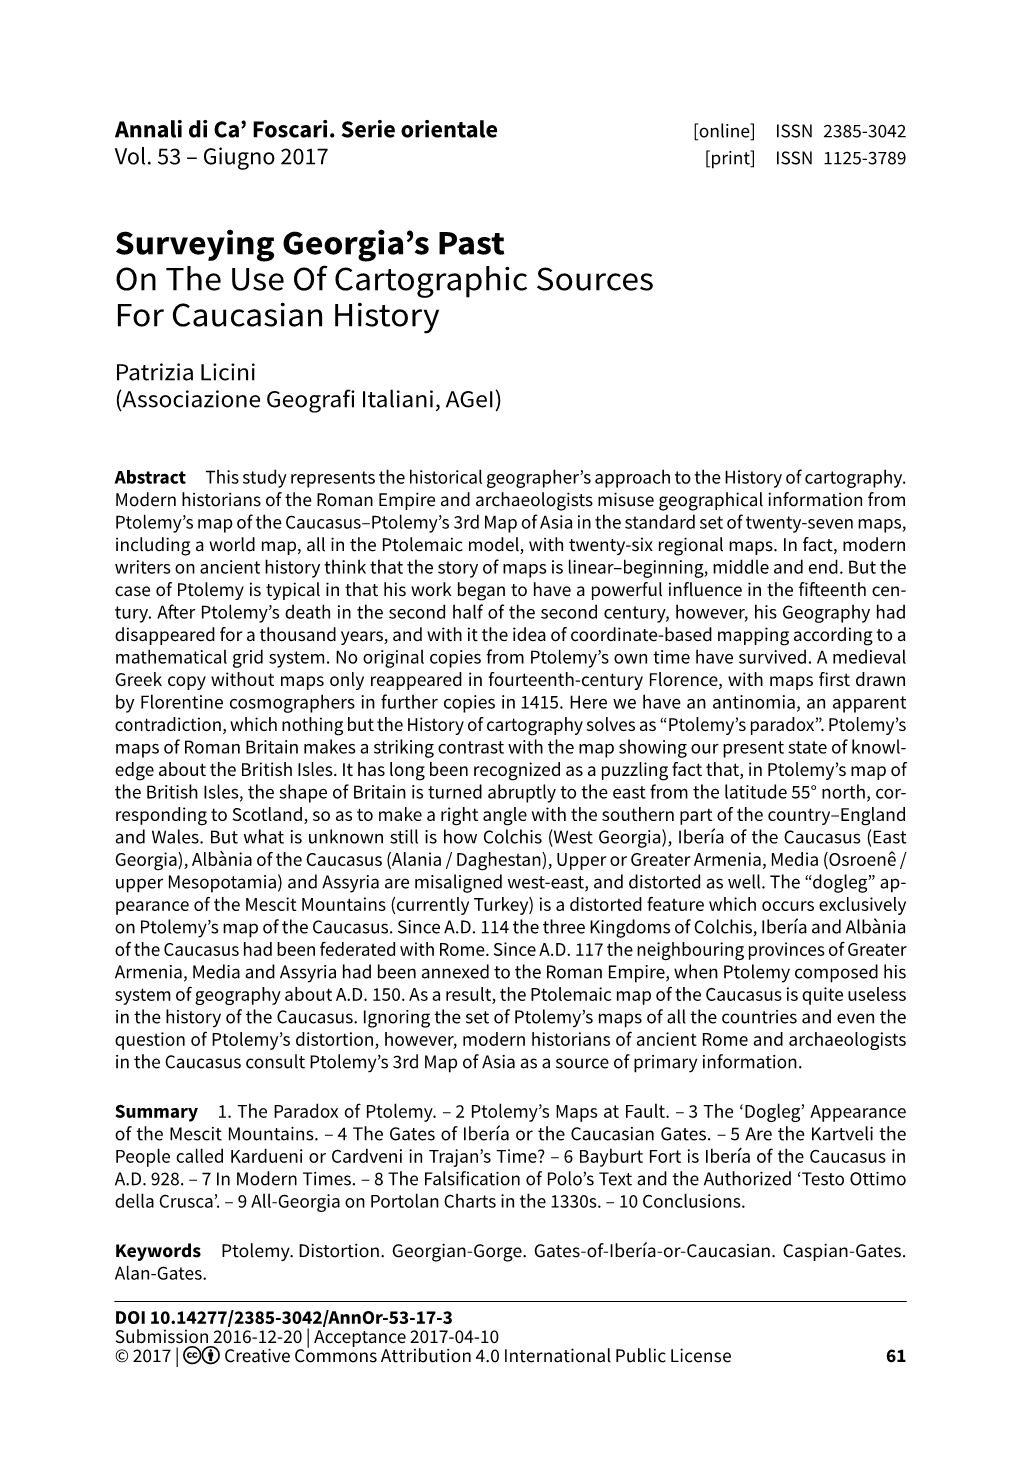 Surveying Georgia's Past on the Use of Cartographic Sources For